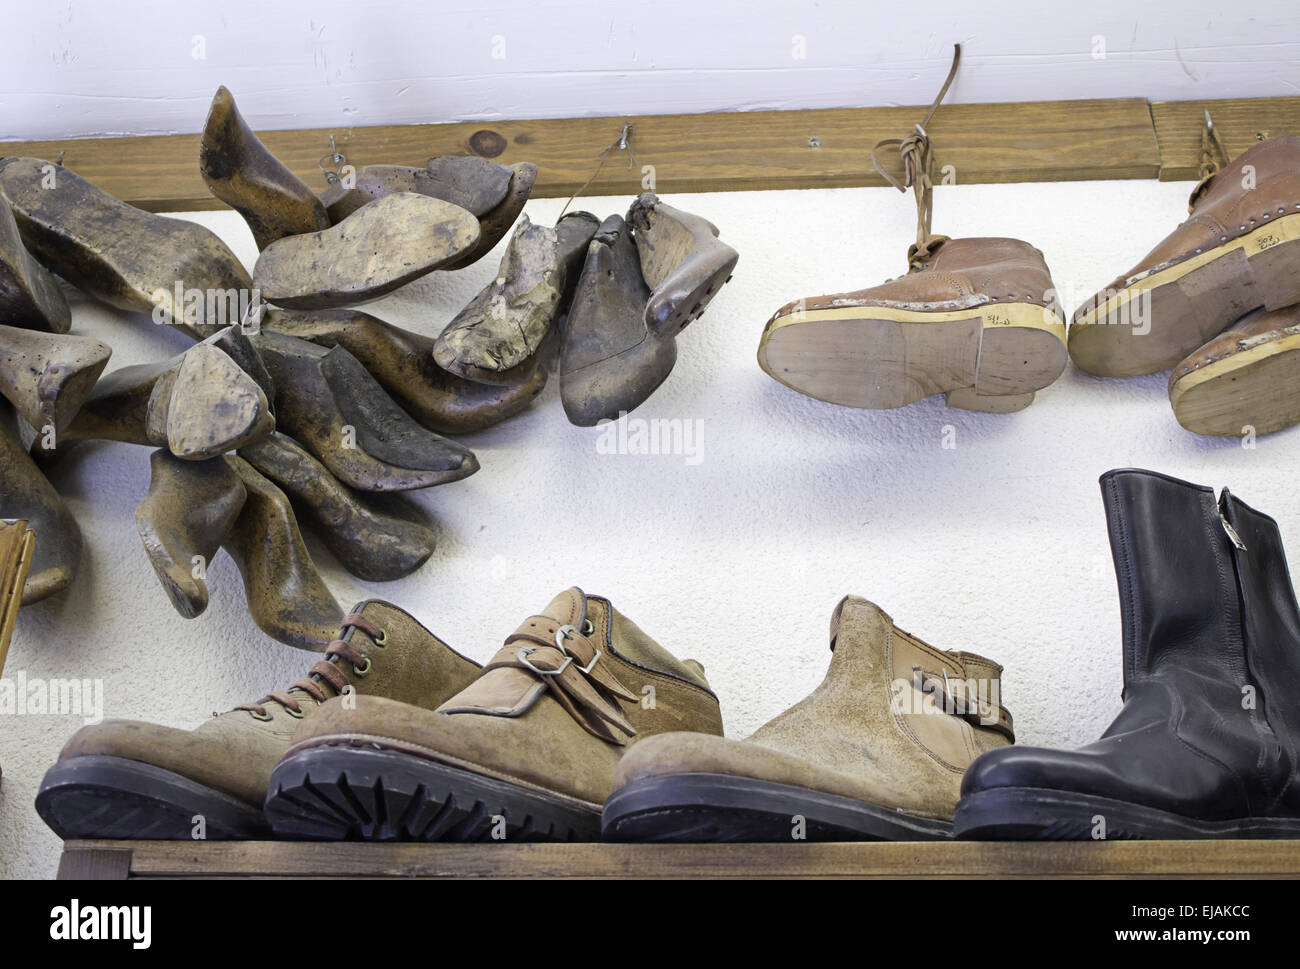 Shoe boots hung on display, sale and footwear Stock Photo